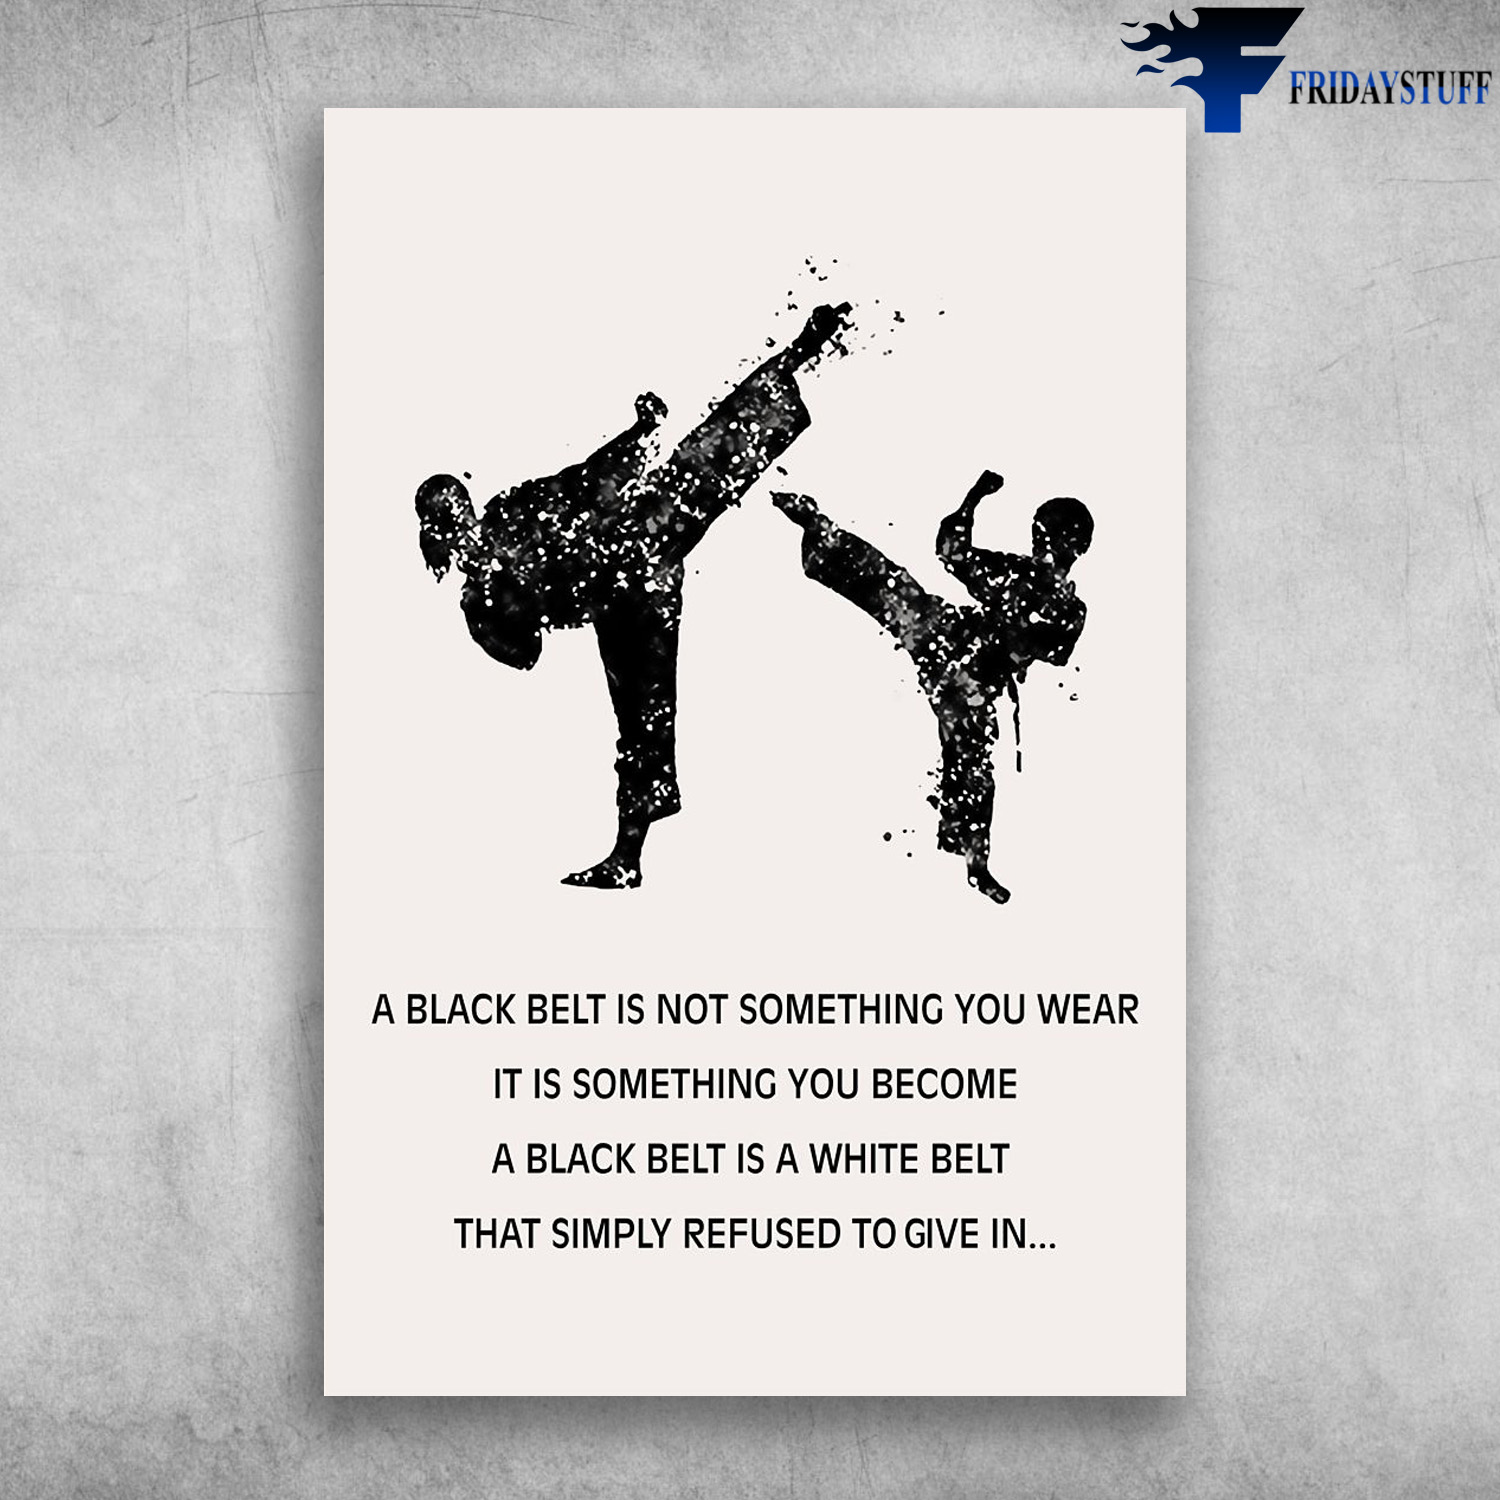 Taekwondo - A Black Belt Is Not Something You Wear, It Is Something You Become A Black Belt Is A White Belt, That Simply Refused To Give In